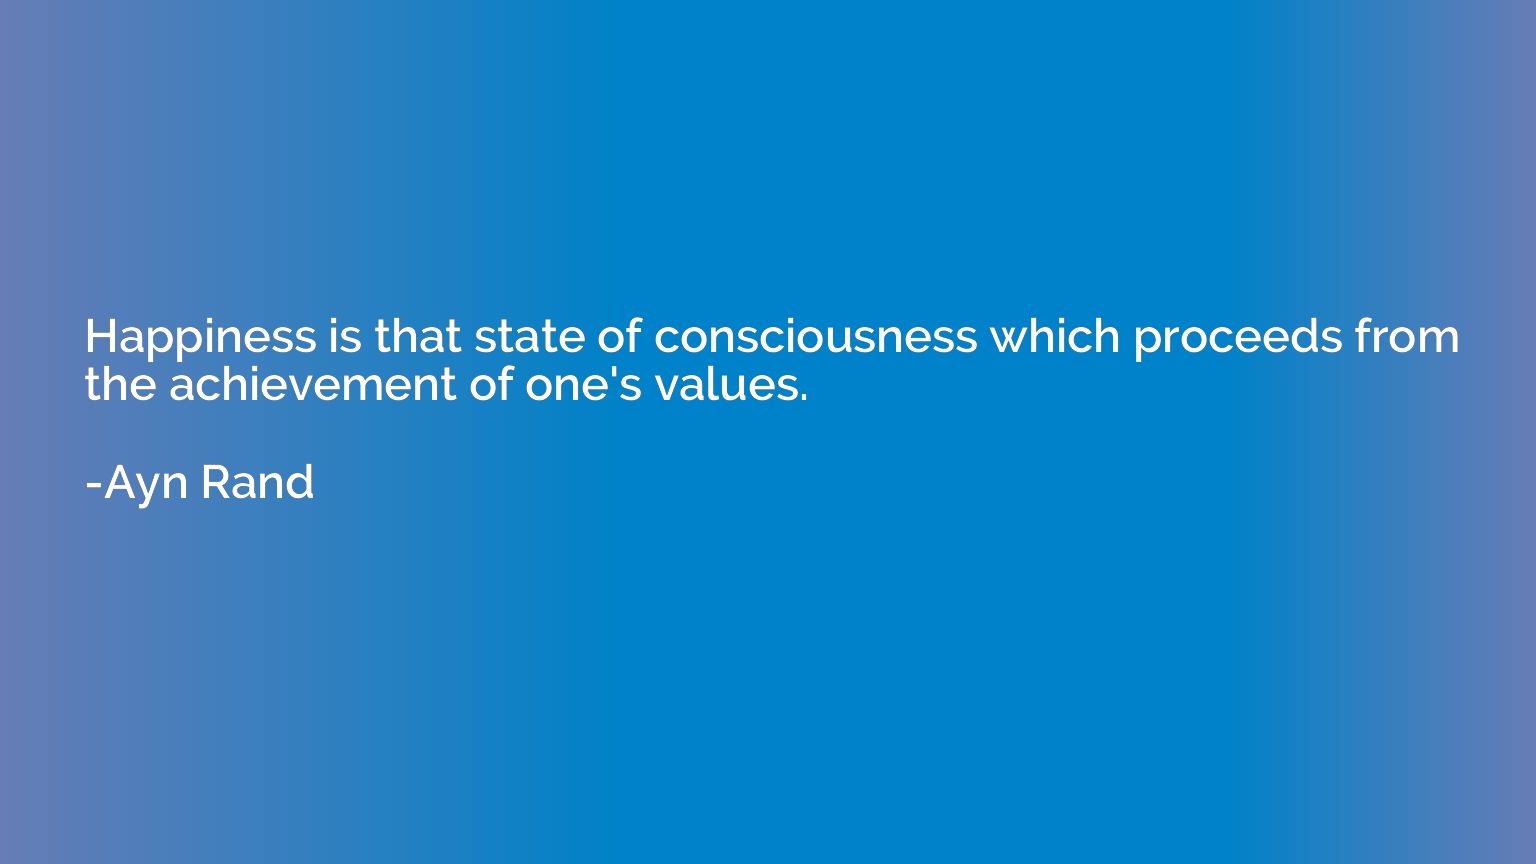 Happiness is that state of consciousness which proceeds from